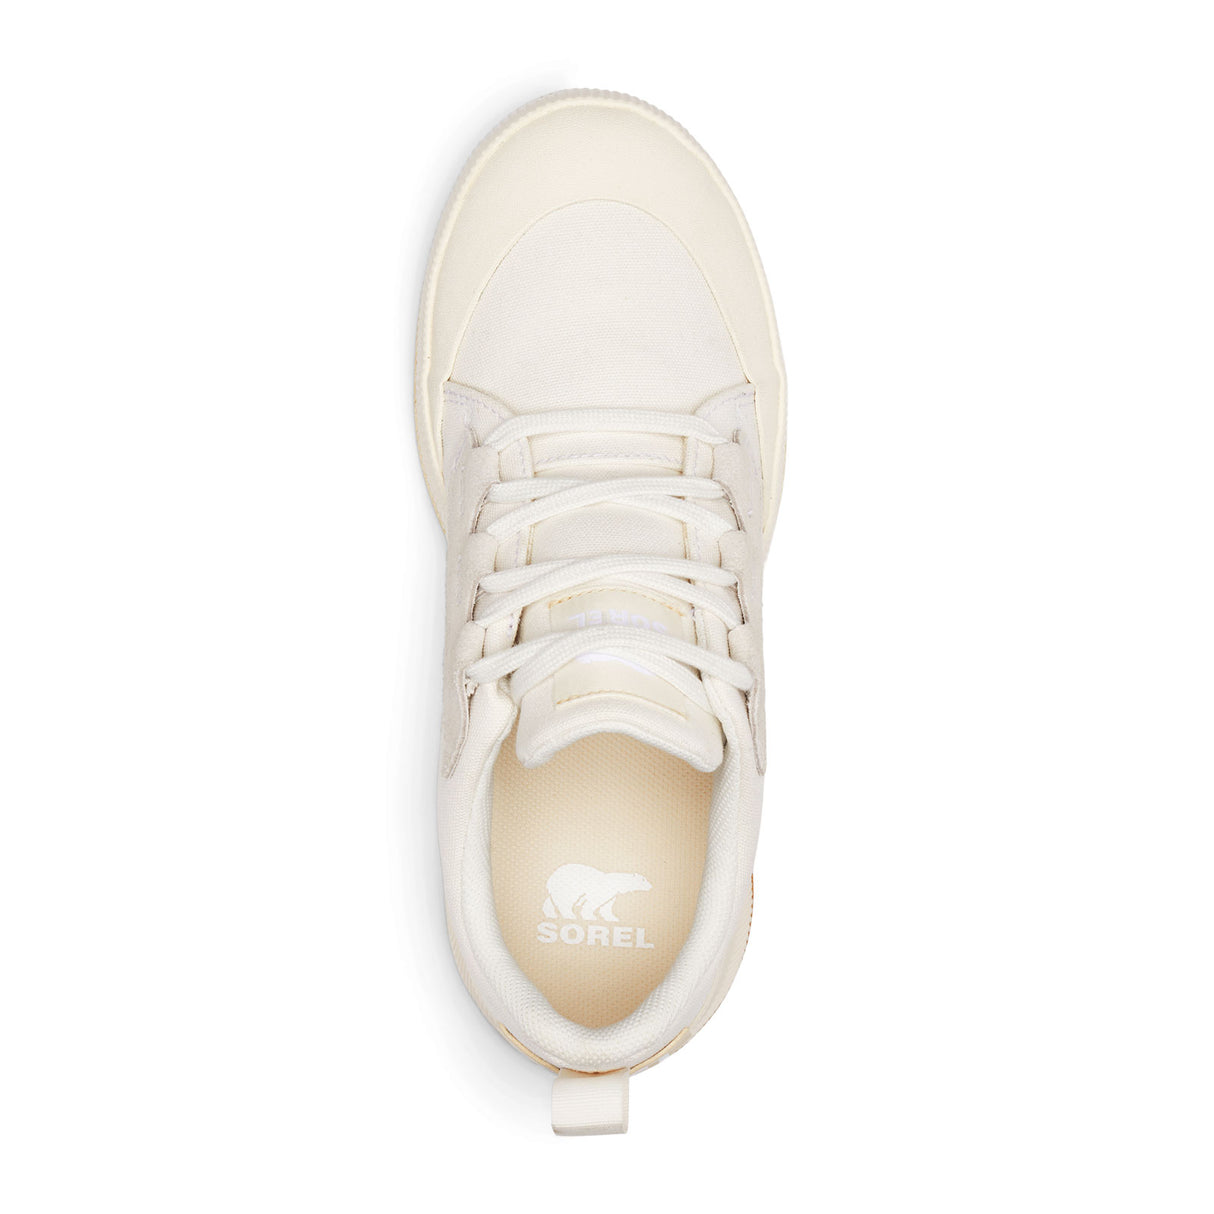 Sorel Out 'N About III Low Canvas Sneaker (Women) - Sea Salt/Chalk Athletic - Athleisure - The Heel Shoe Fitters